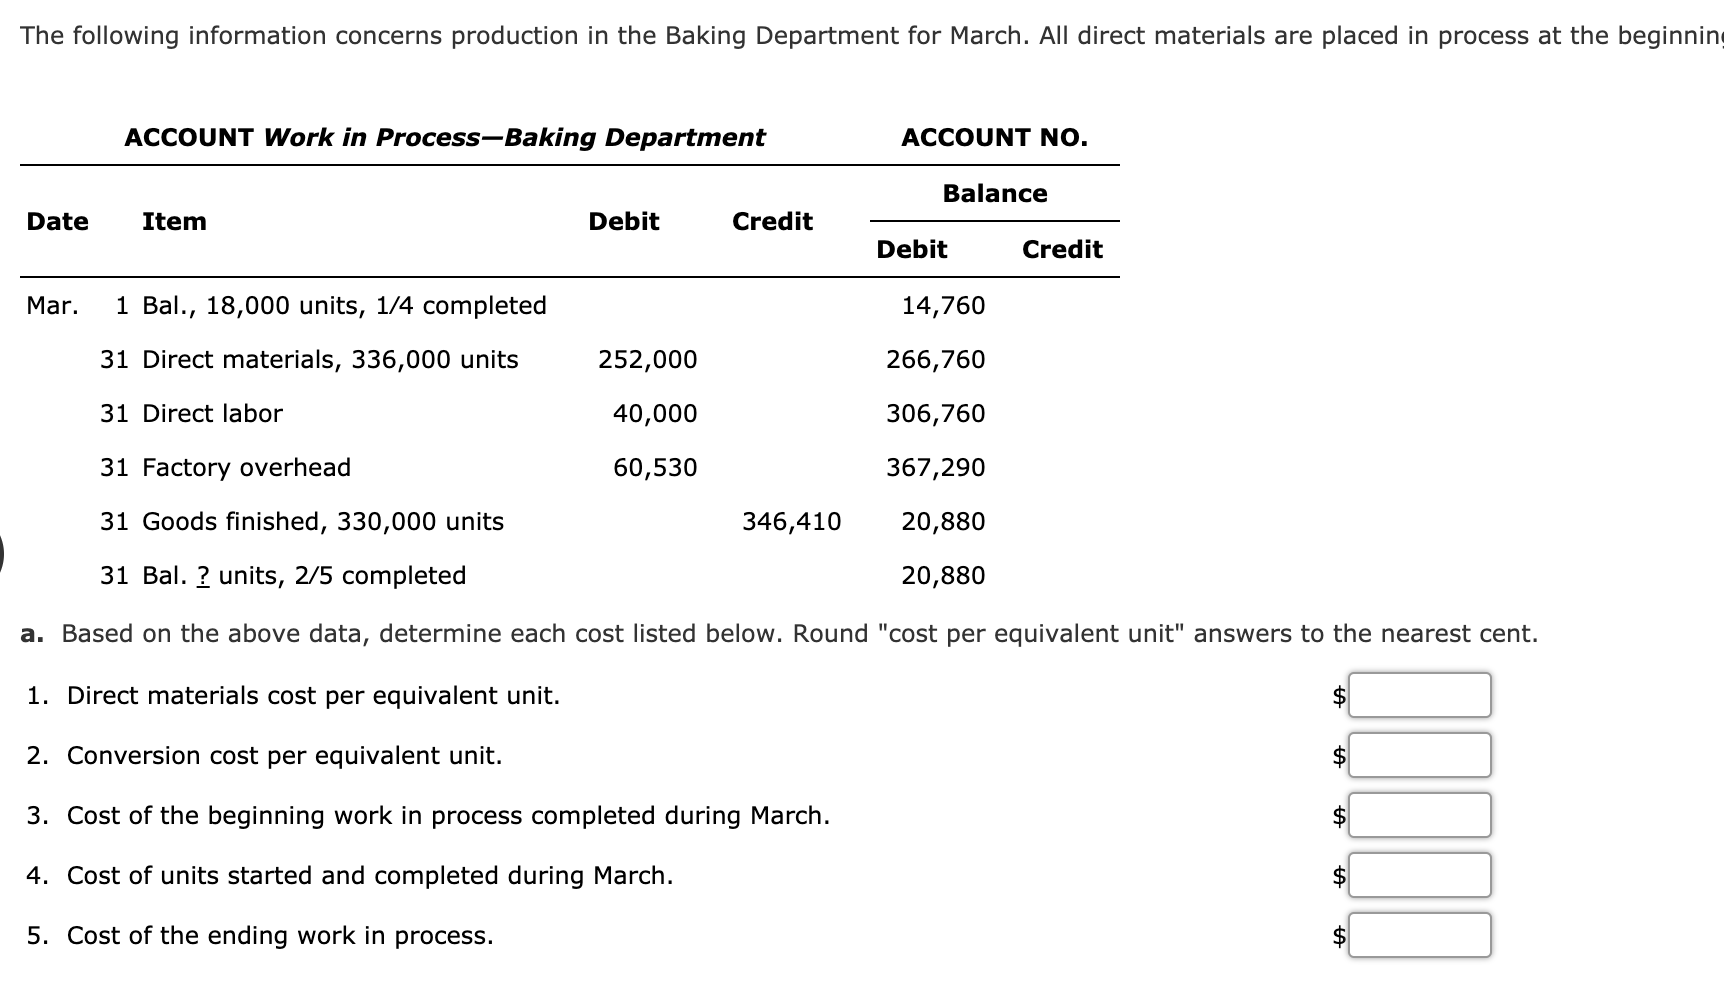 The following information concerns production in the Baking Department for March. All direct materials are placed in process at the beginni
ACCOUNT Work in Process-Baking Department
ACCOUNT NO.
Balance
Date
Item
Debit
Credit
Debit
Credit
Mar.
1 Bal., 18,000 units, 1/4 completed
14,760
31 Direct materials, 336,000 units
252,000
266,760
31 Direct labor
40,000
306,760
31 Factory overhead
60,530
367,290
31 Goods finished, 330,000 units
346,410
20,880
31 Bal. ? units, 2/5 completed
20,880
a. Based on the above data, determine each cost listed below. Round "cost per equivalent unit" answers to the nearest cent.
1. Direct materials cost per equivalent unit.
2. Conversion cost per equivalent unit.
2$
3. Cost of the beginning work in process completed during March.
4. Cost of units started and completed during March.
5. Cost of the ending work in process.
